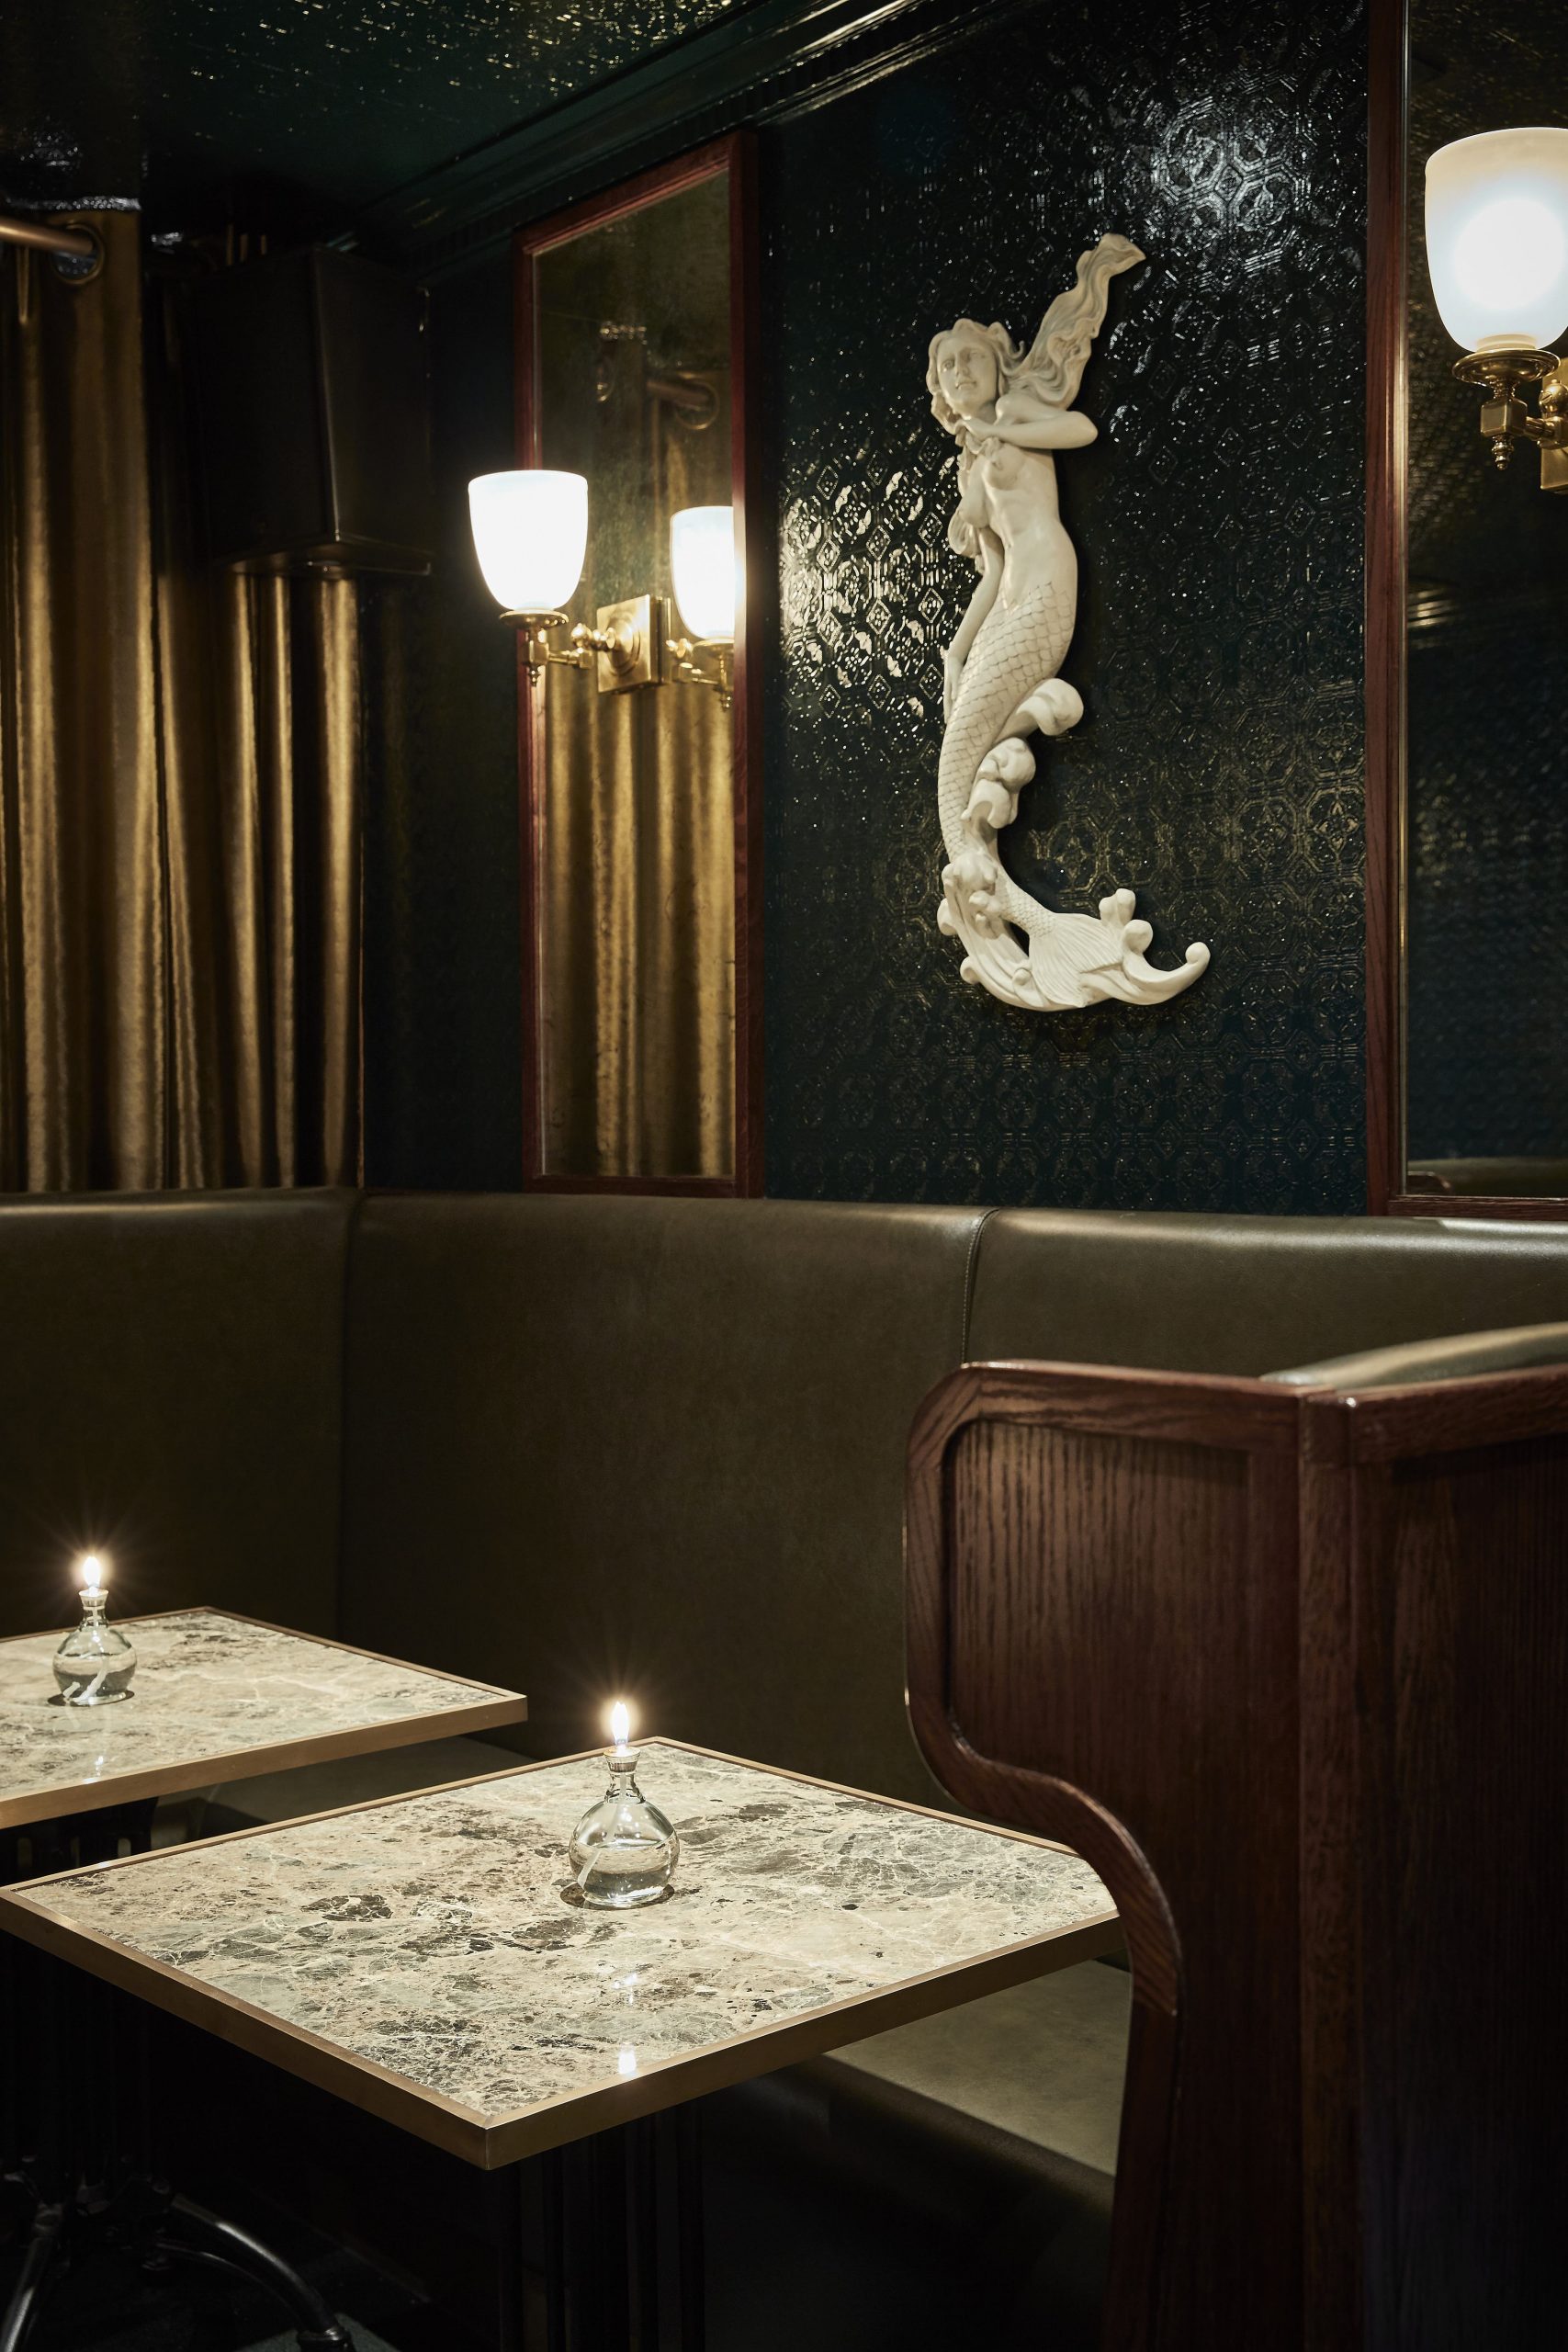 Banquette seating area with mermaid sculpture on wall